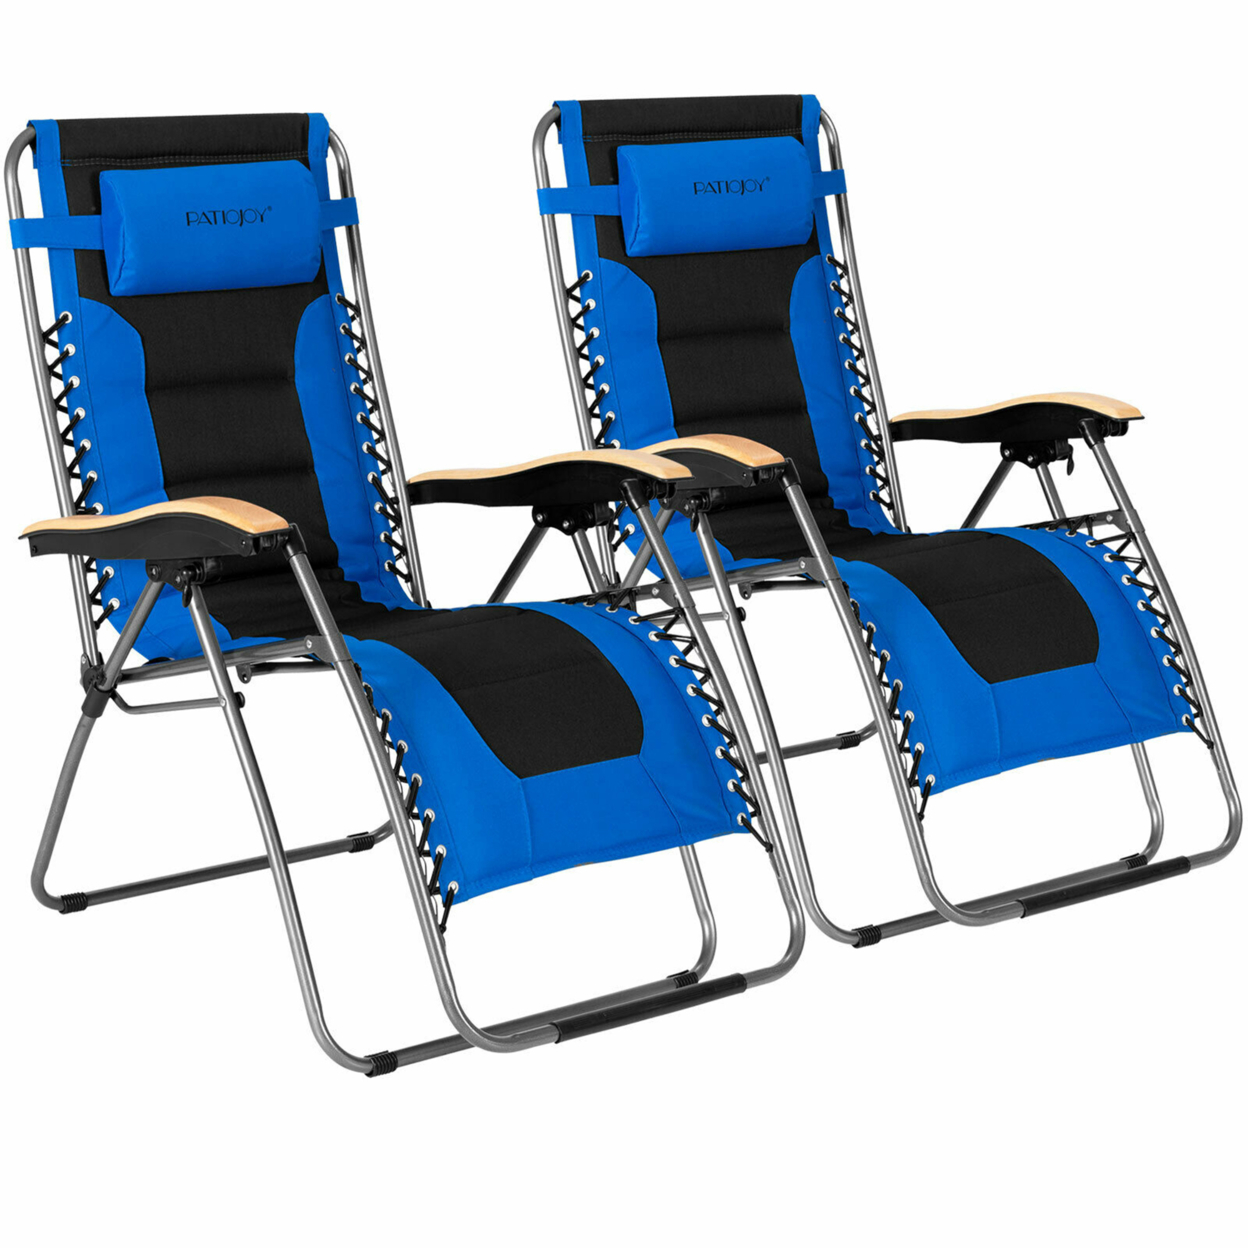 2PCS Folding Zero Gravity Chair Padded Lounge Chair W/ Beech Armrests - Turquoise